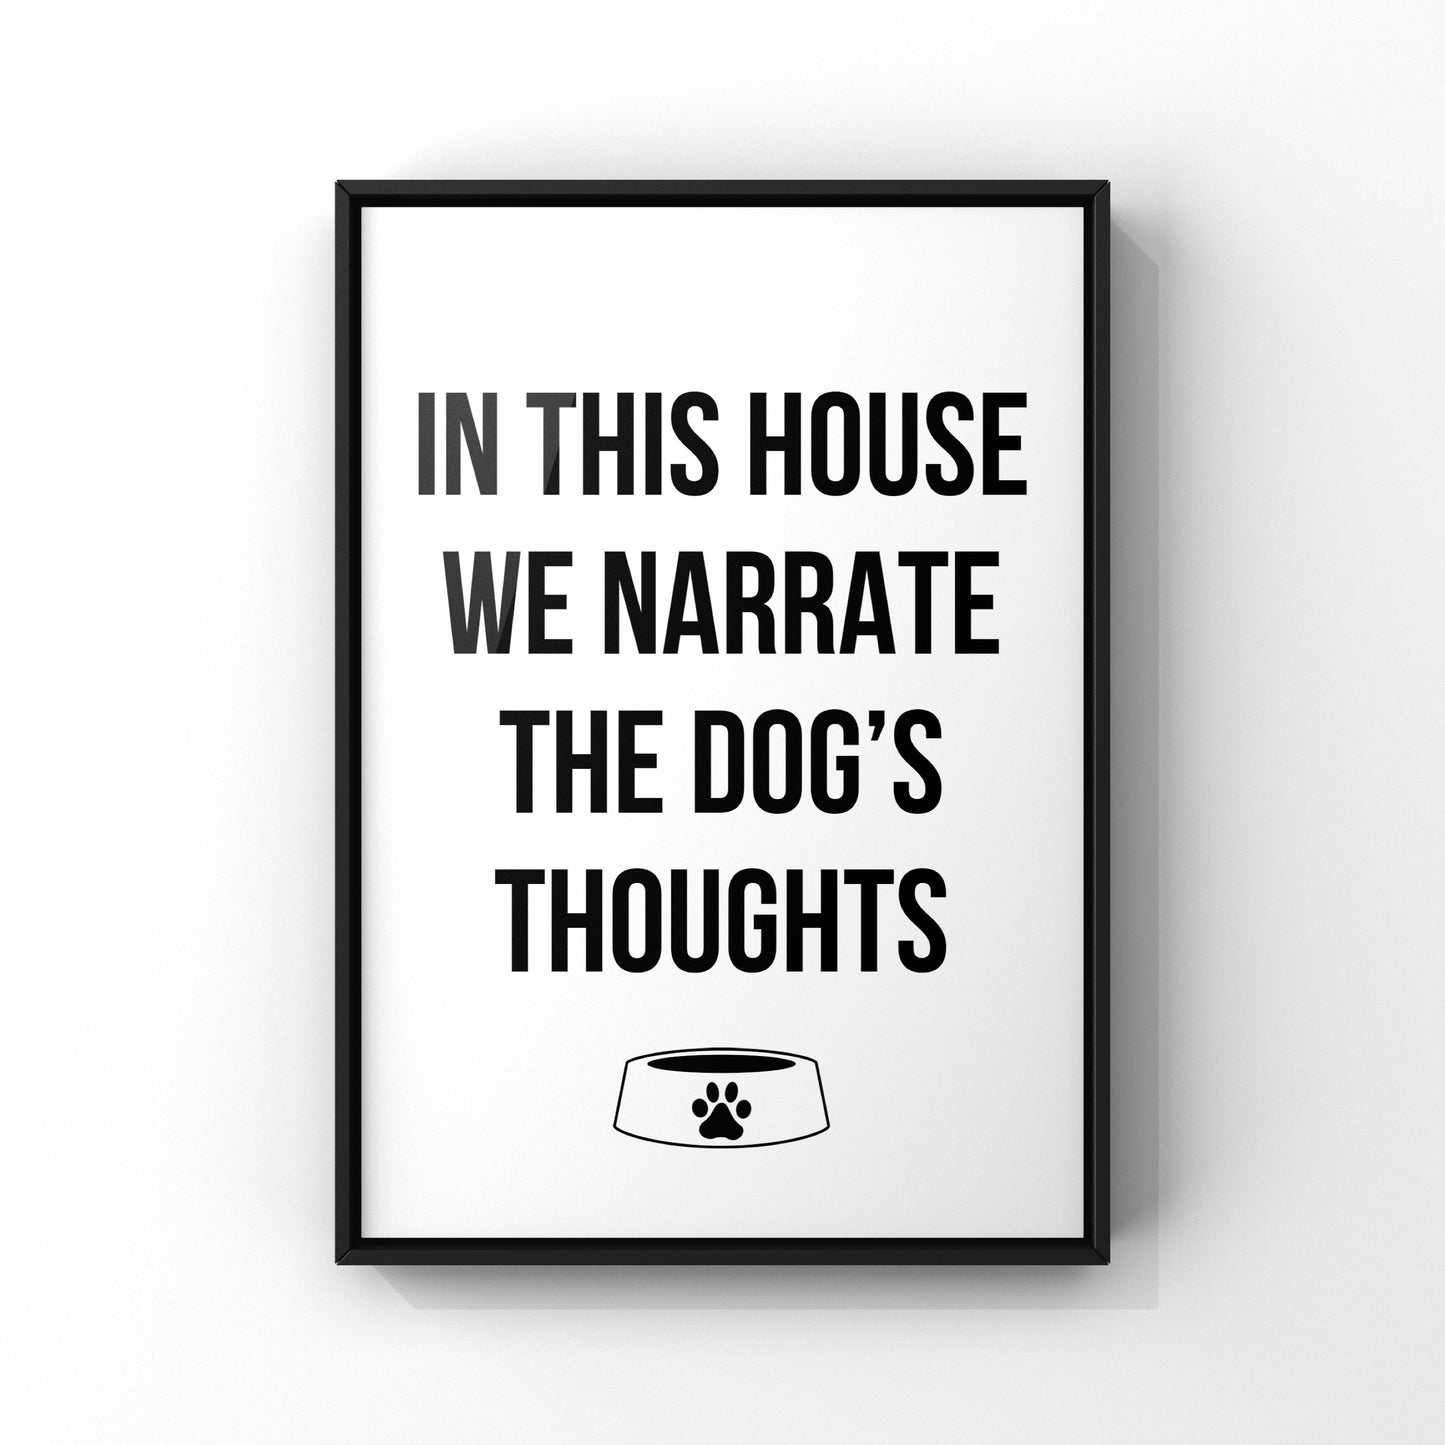 Narrate the dog’s thoughts